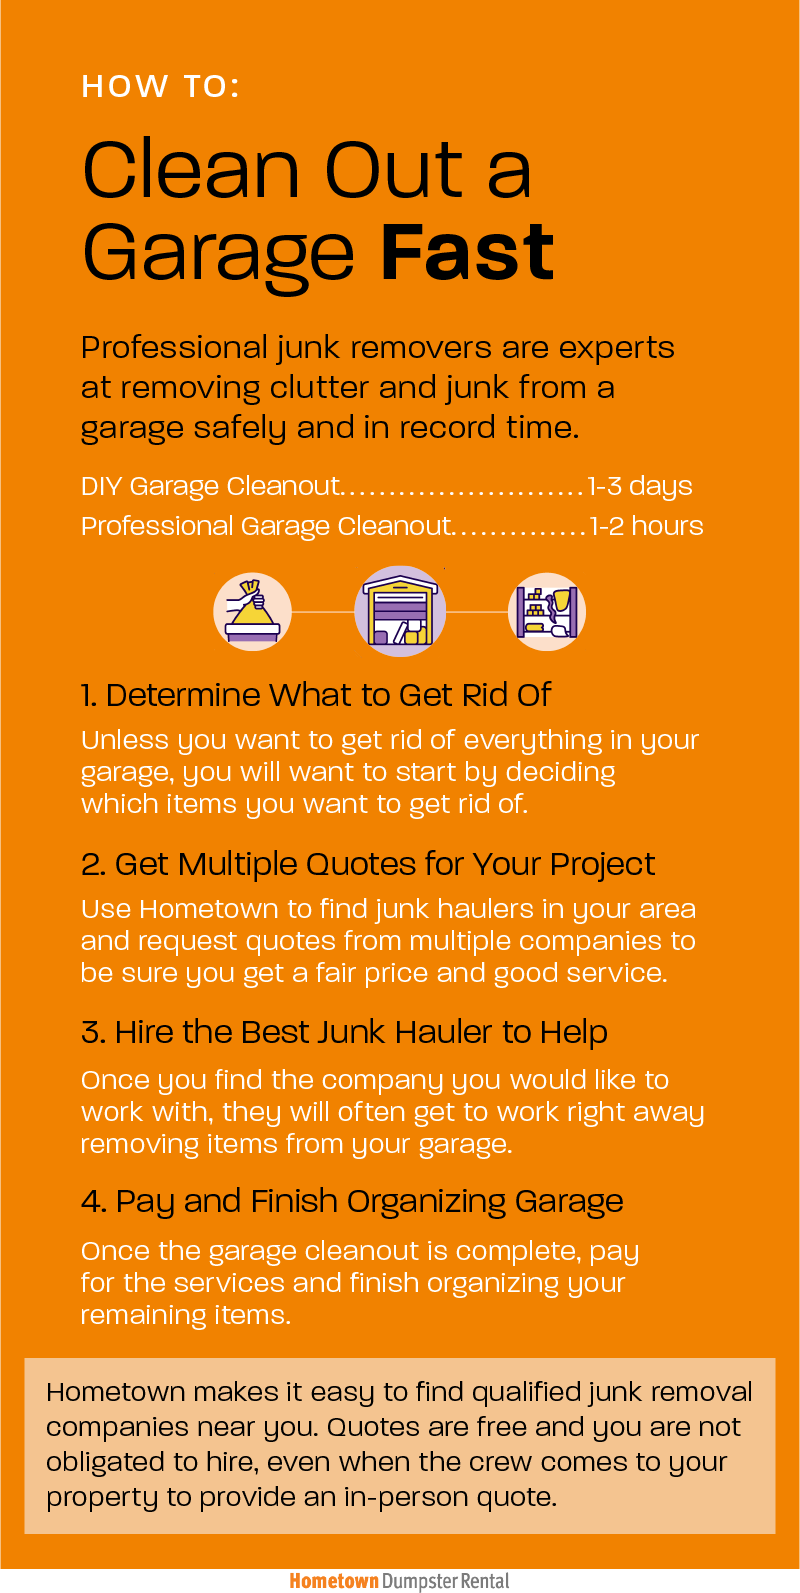 how to clean out garage fast infographic